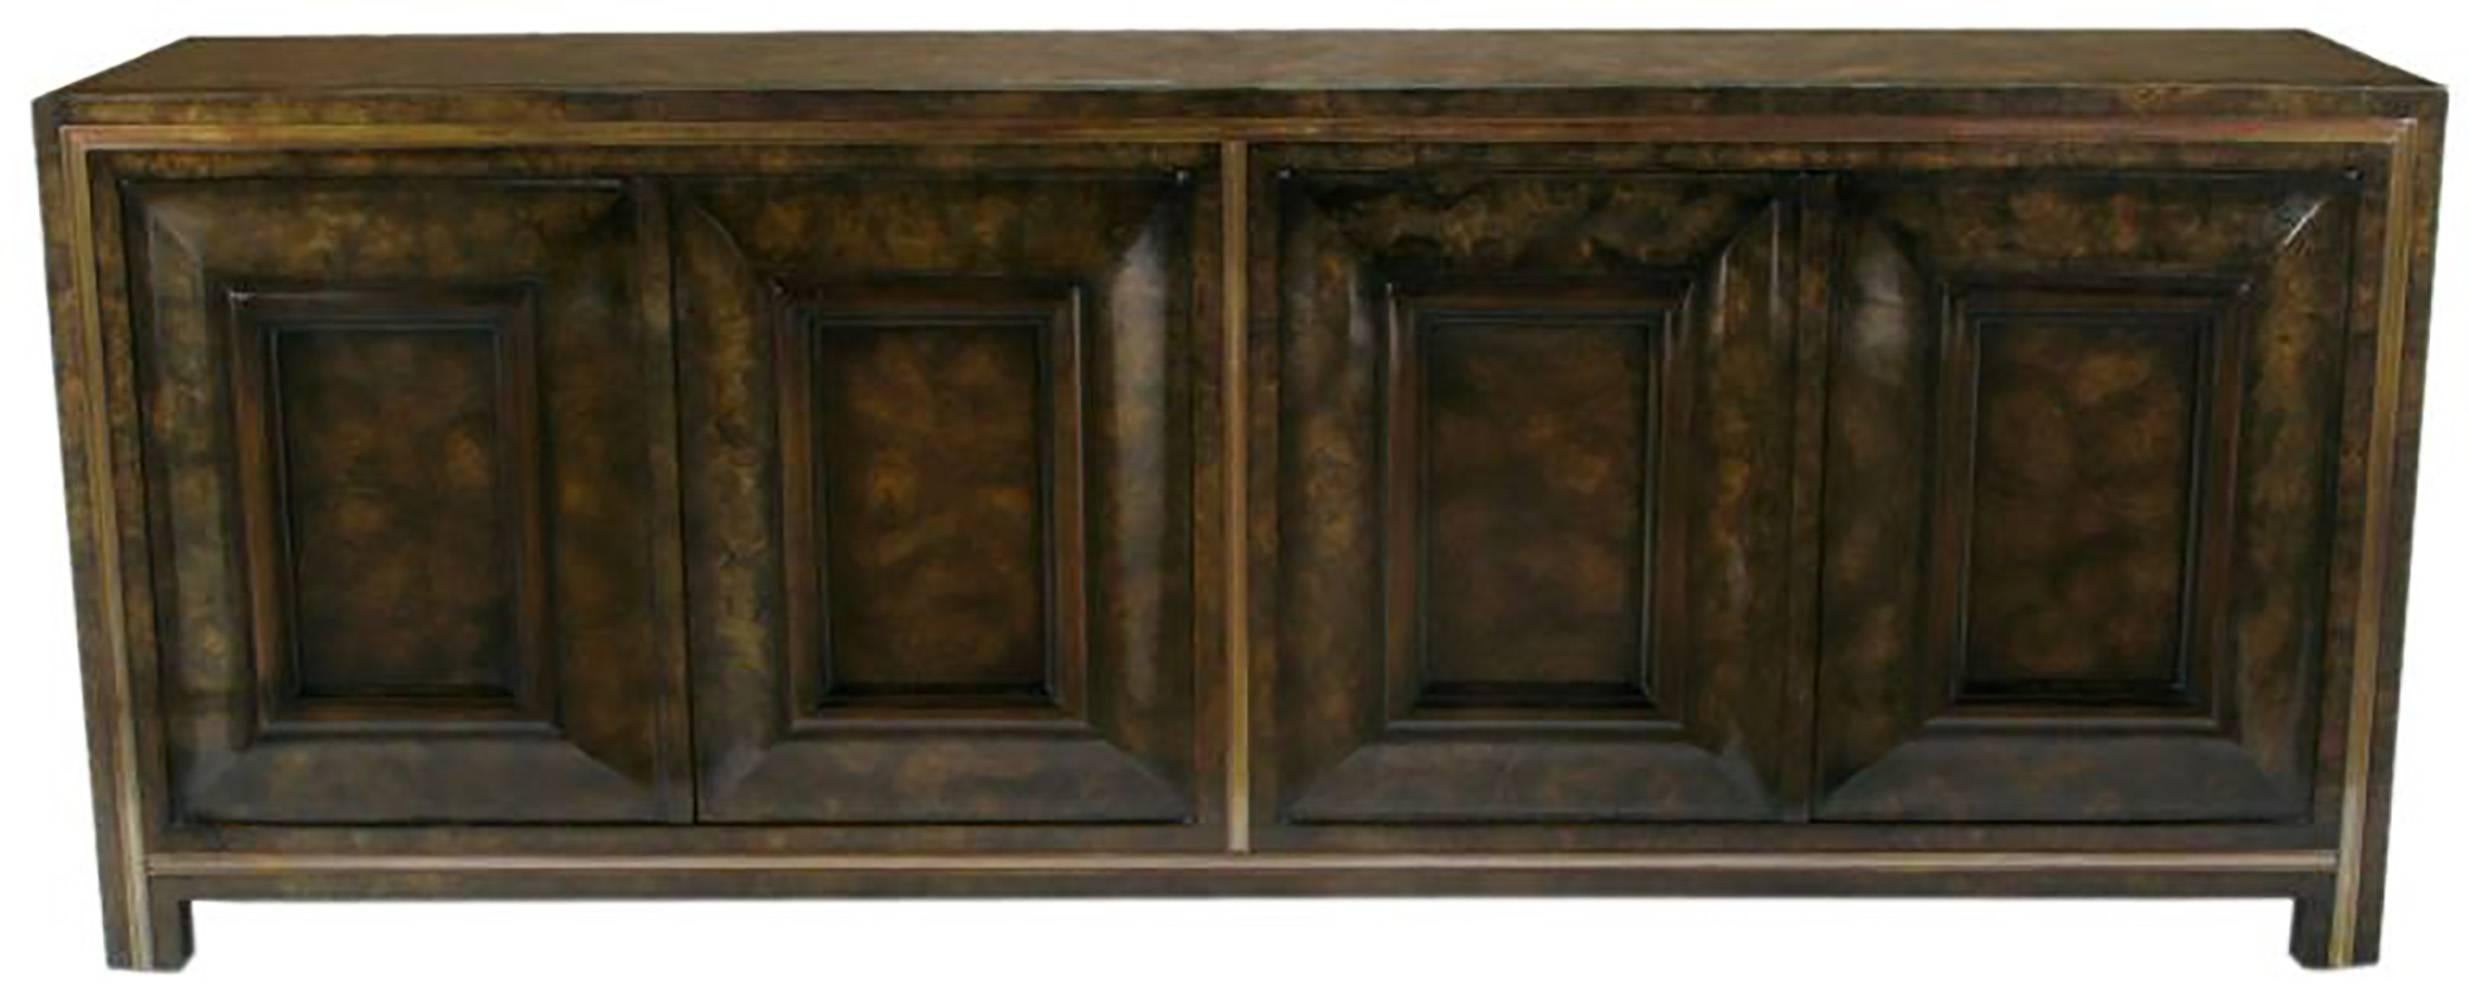 Elegant and substantial cabinet by Mastercraft. The four frame and panel doors open to reveal a two section storage area. One side has four drawers with a silverware drawer. The other section has shelves. Brass inlay has a unique acid washed patina